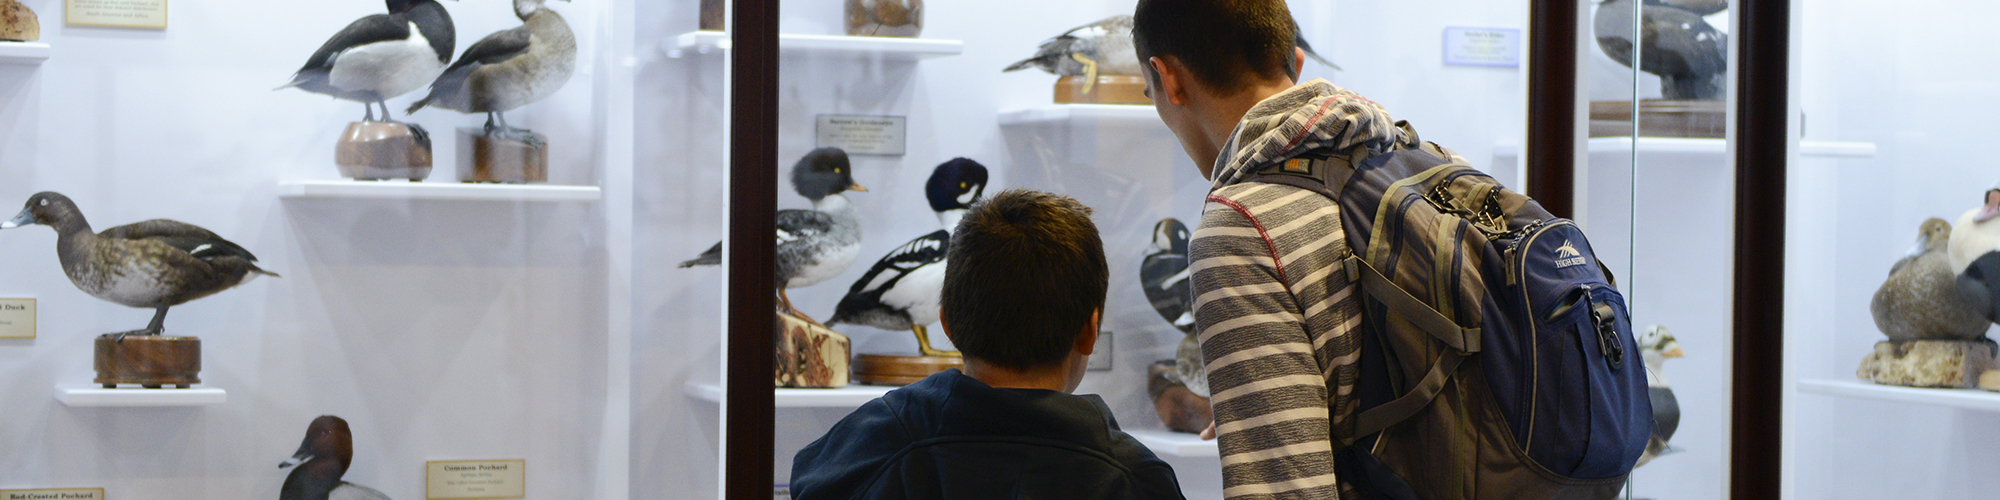 A student and a young boy look into an exhibit of birds at a museum